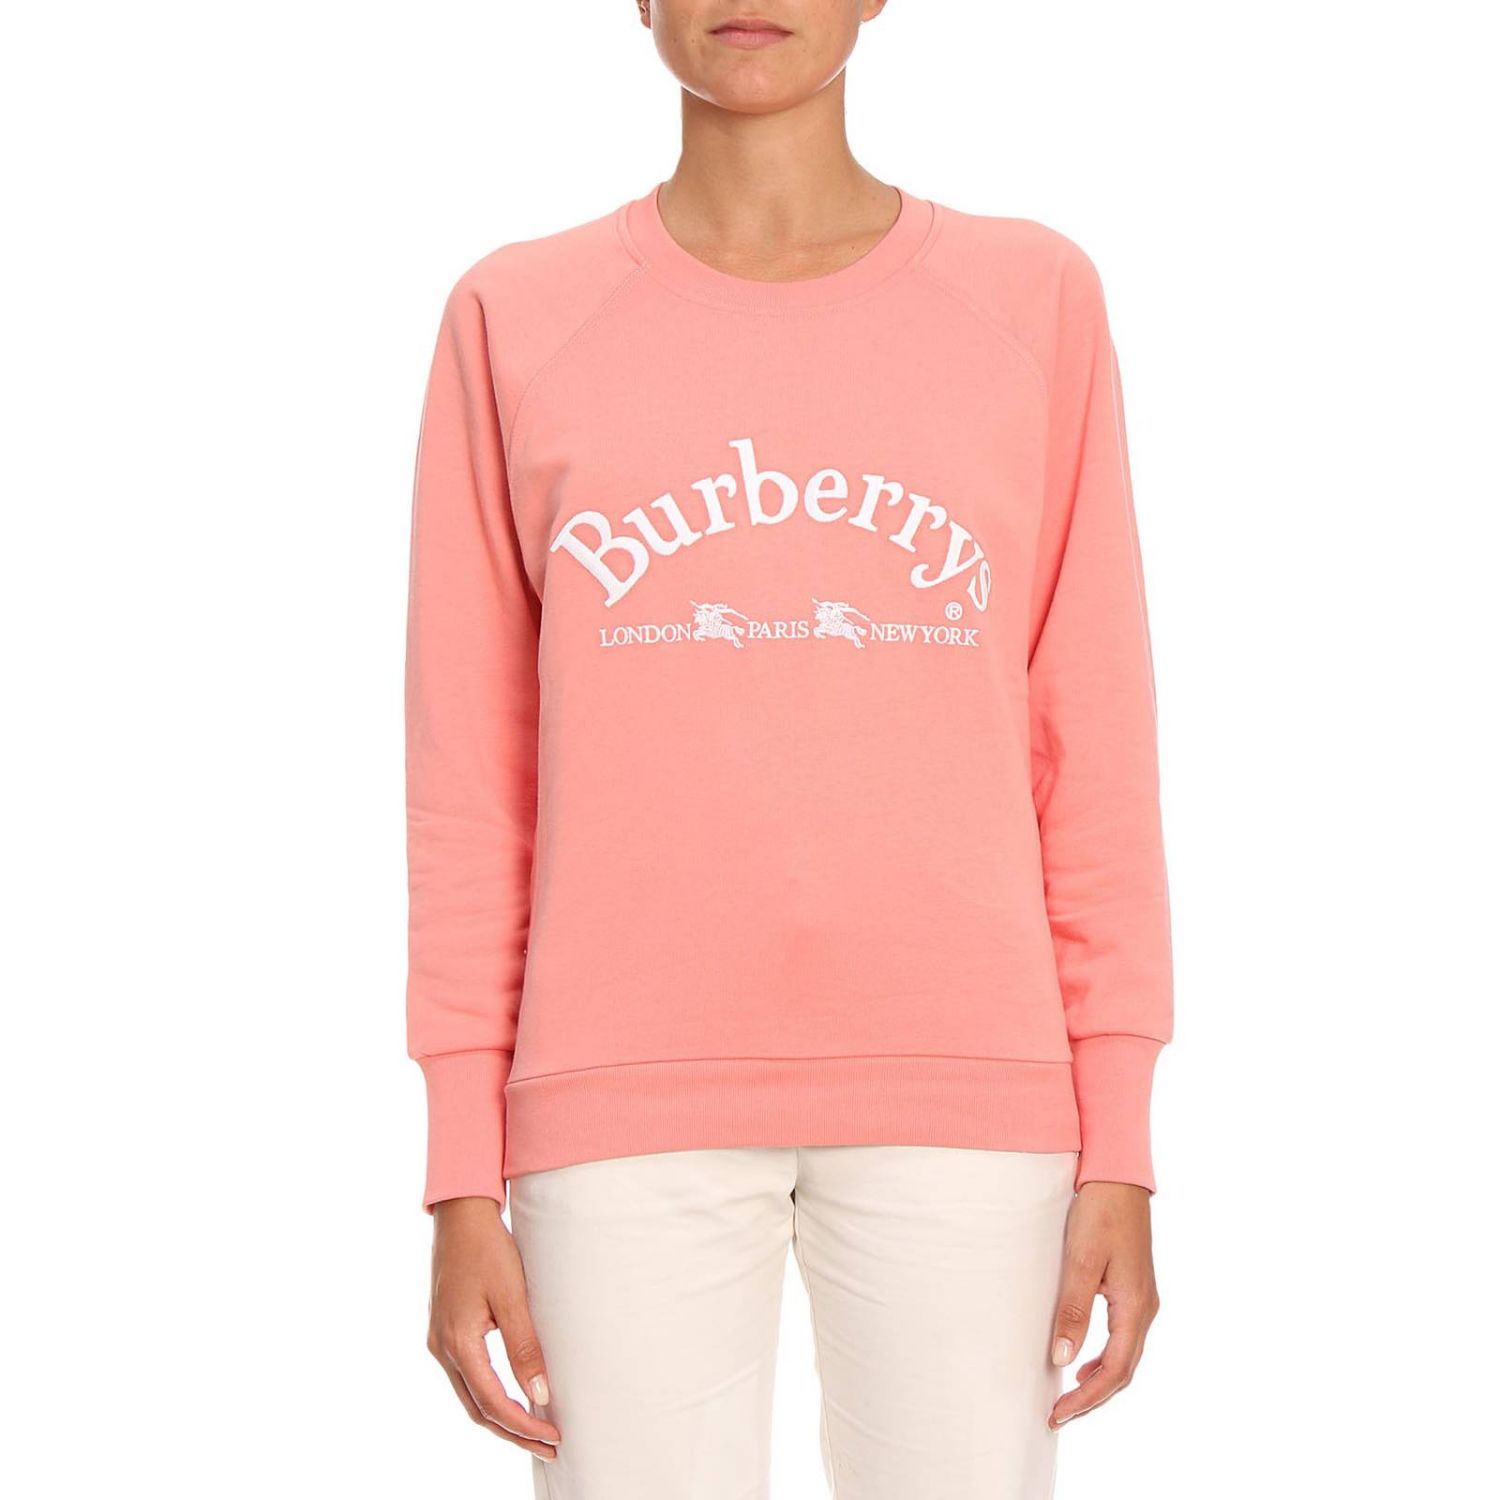 burberry pink sweater